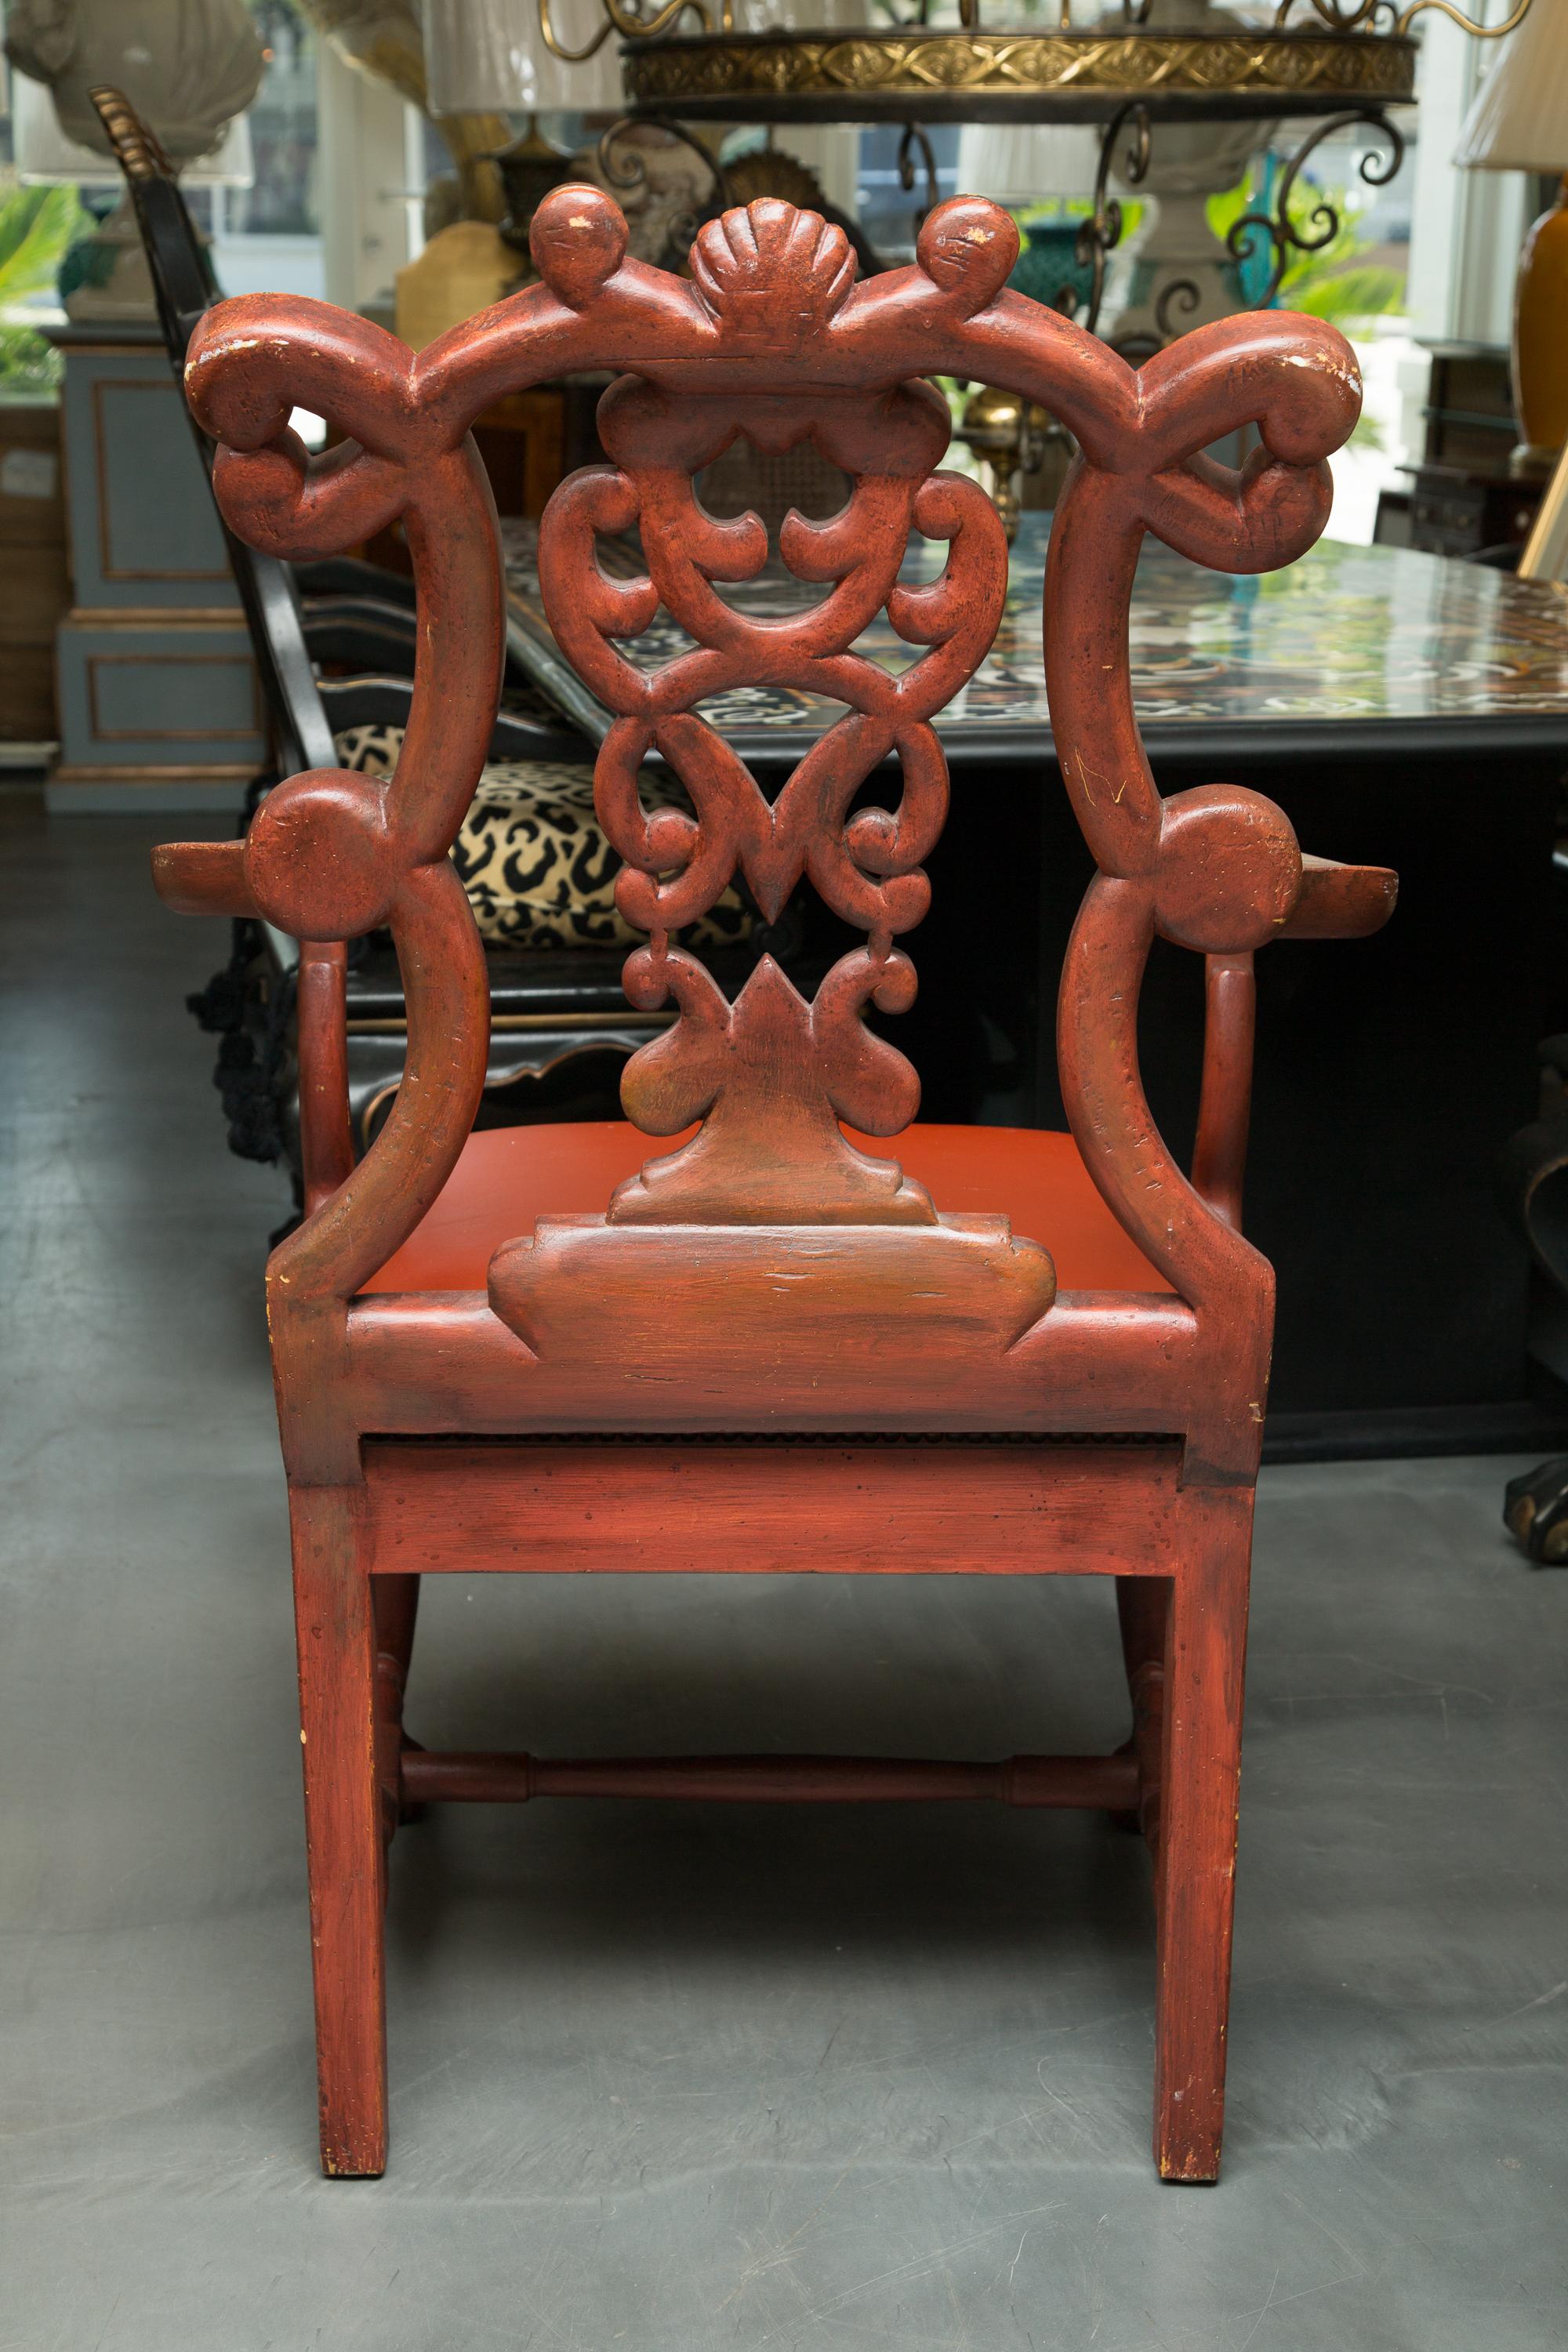 This is a stately pair of Italian armchairs with chinoiserie painted overall on a parcel-gilt and Chinese-red ground. The undulating top rail is over a backsplash of interlocking scrolls. There is an upholstered leather seat stabilized by brass